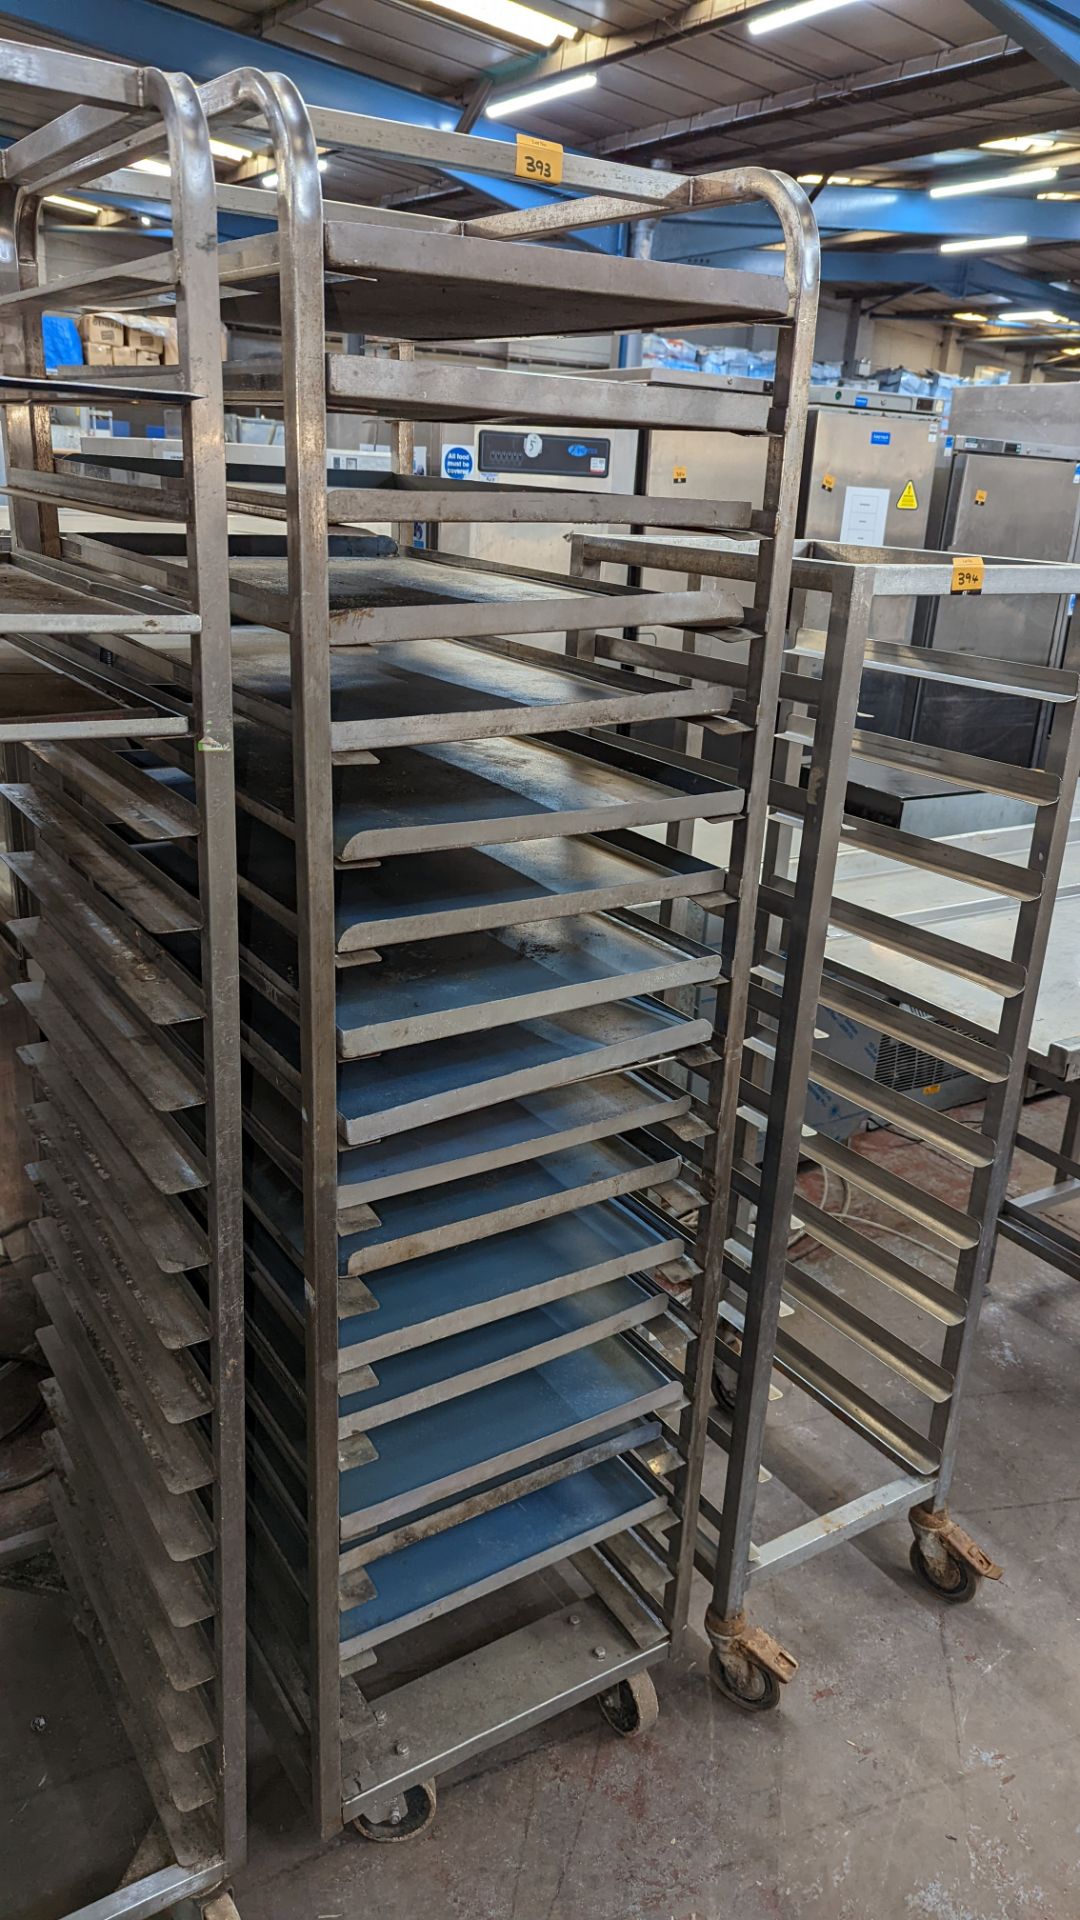 Tray holding trolley with 20 slots including 18 trays